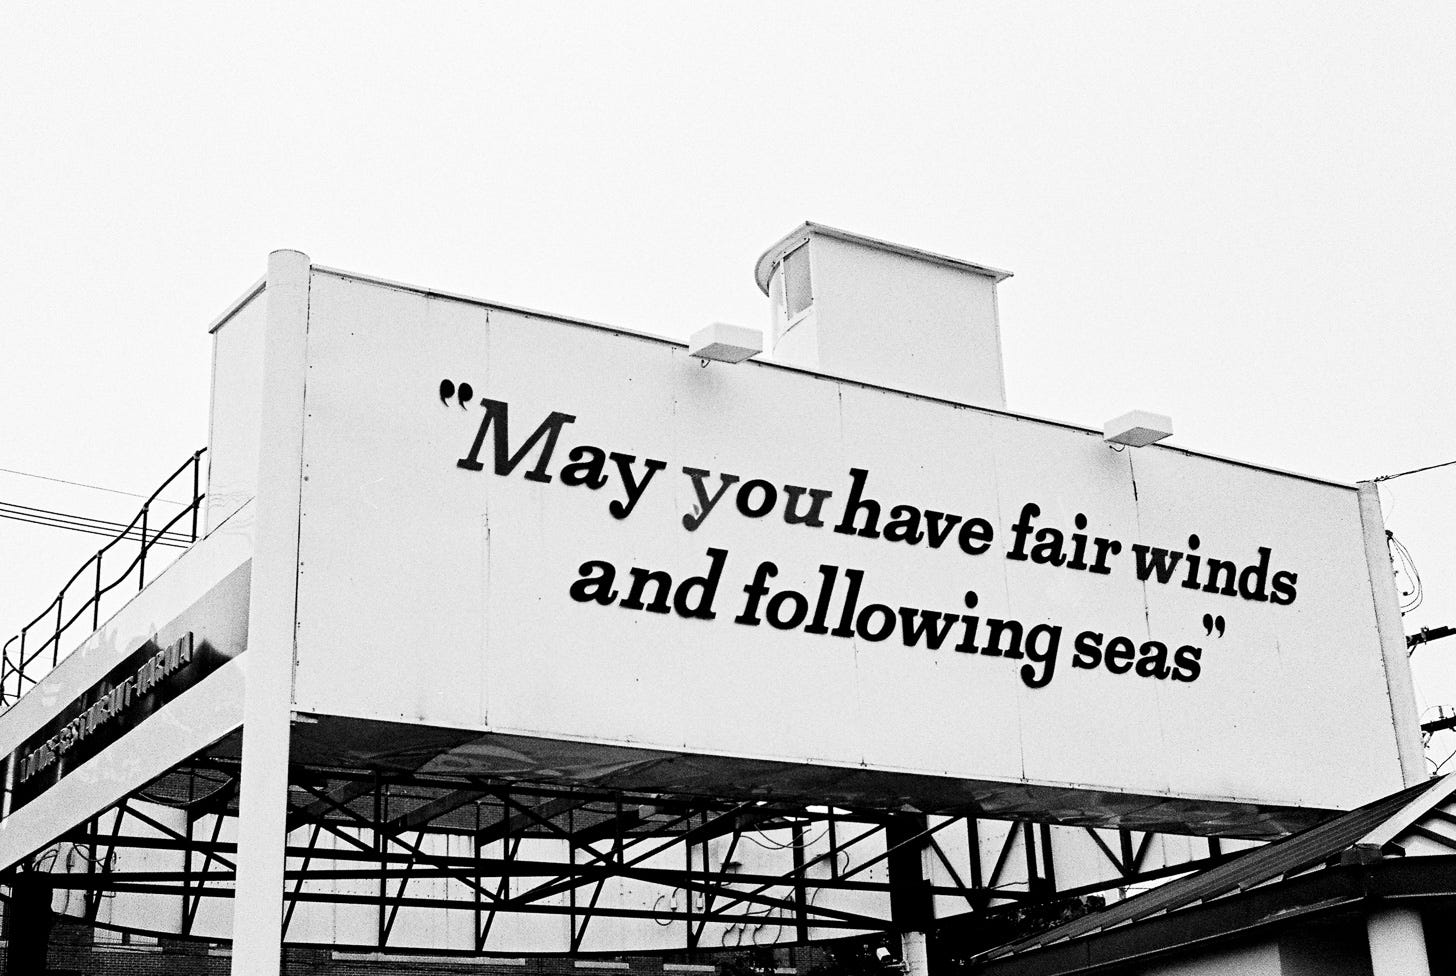 Billboard that says "May you have fair winds and following seas"